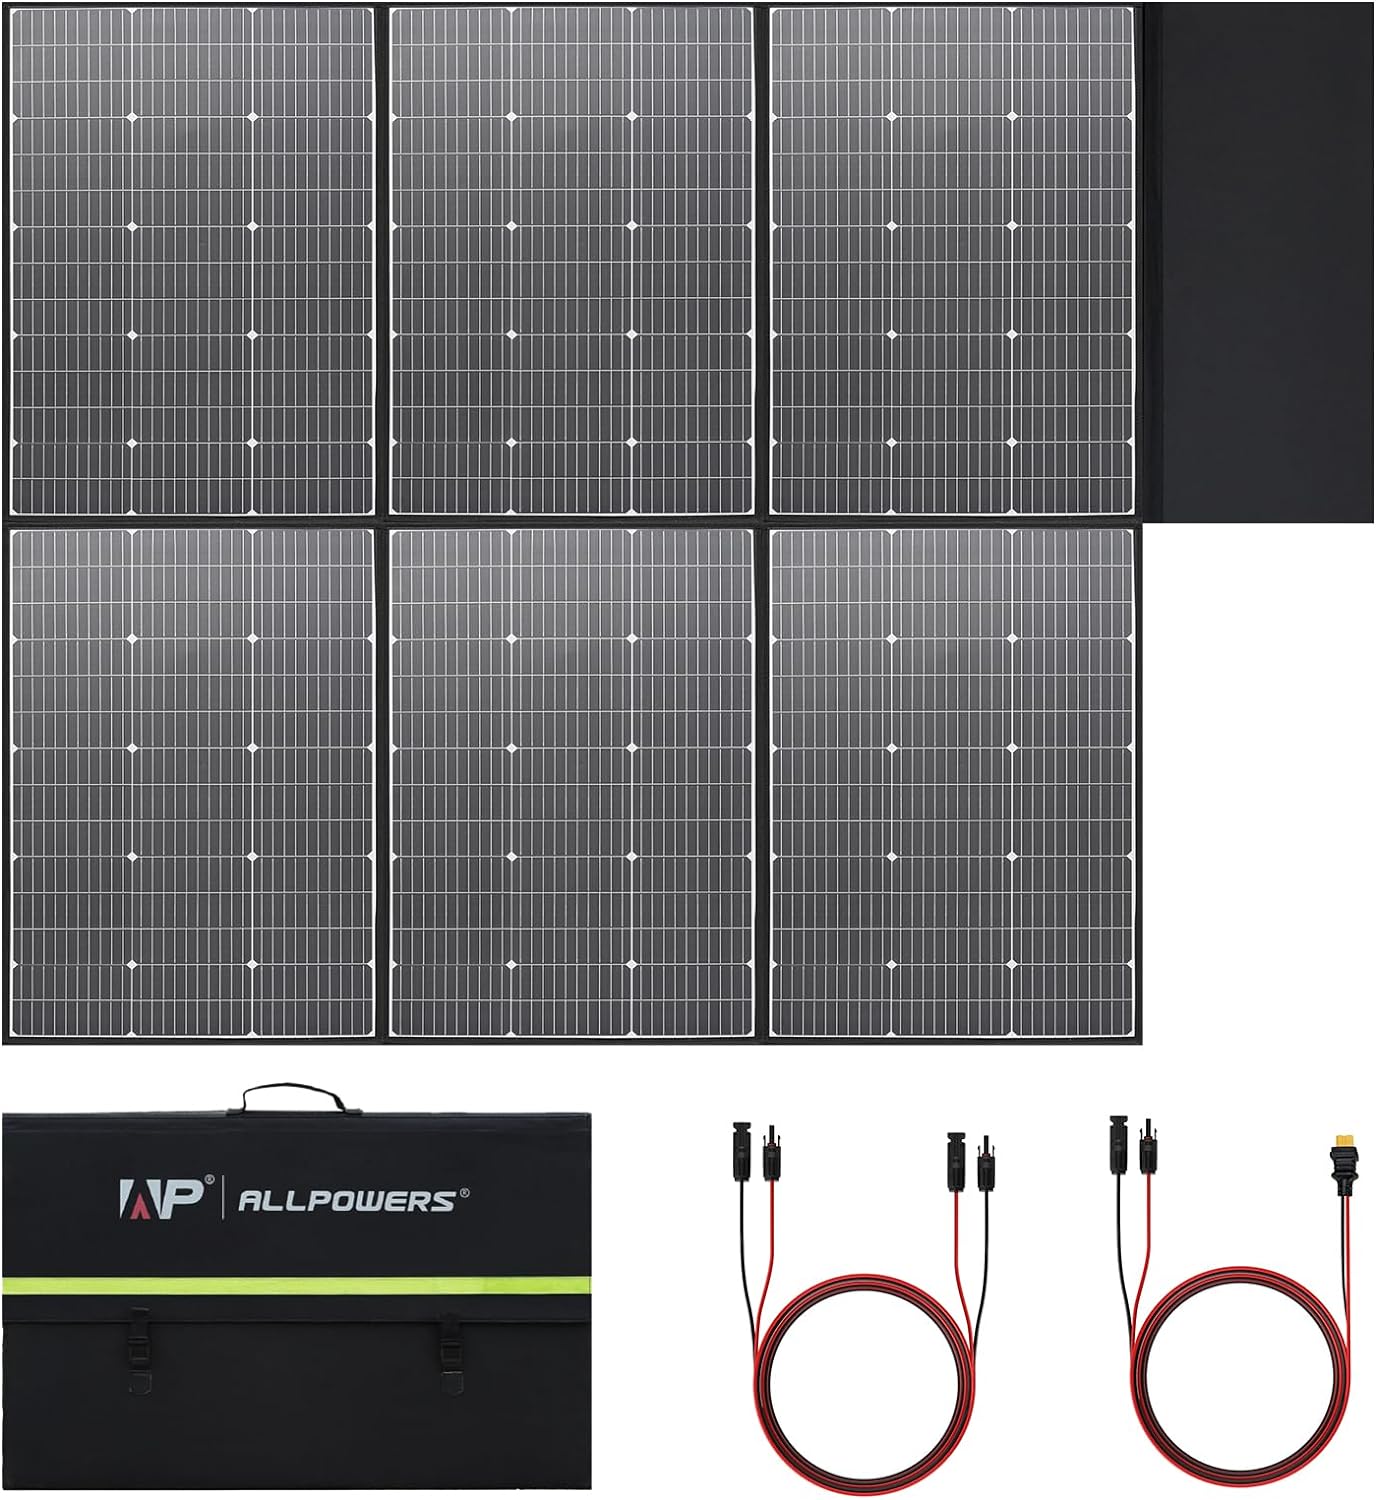 ALLPOWERS SP039 600W Monocrystalline Portable Solar Panel Waterproof IP67 RV Solar Panel Kit with 44V MC-4 Output Foldable Solar Charger for Outdoor Adventures Power Outage Solar Generator - ALLPOWERS SP039 600W Solar Panel Review